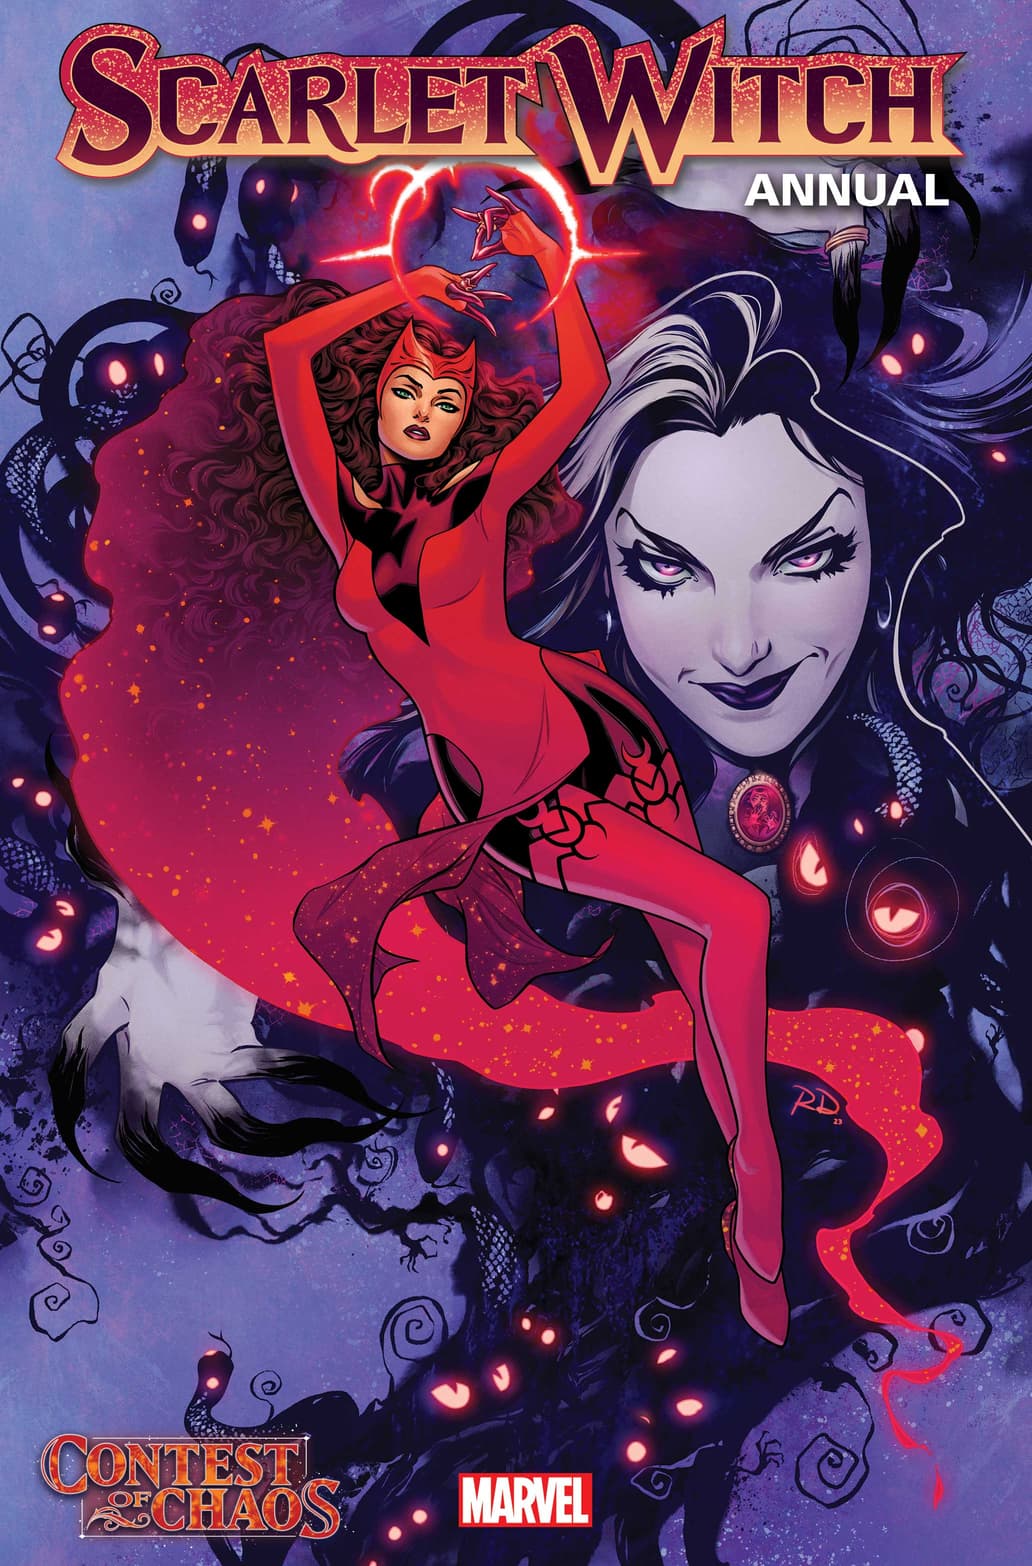 SCARLET WITCH ANNUAL #1 cover by Russell Dauterman